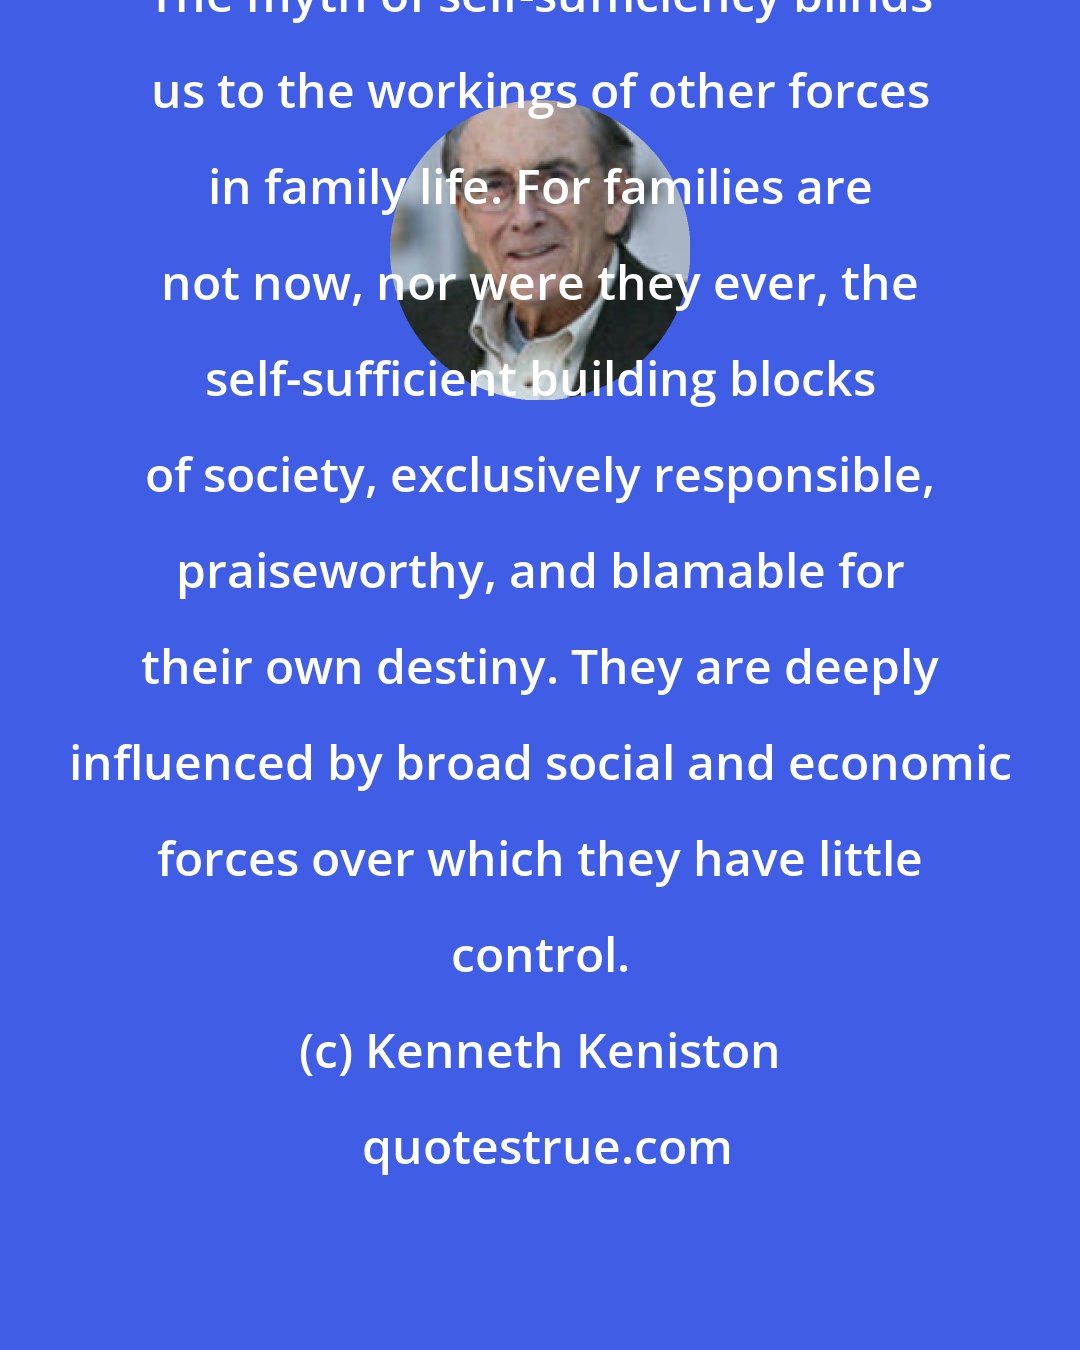 Kenneth Keniston: The myth of self-sufficiency blinds us to the workings of other forces in family life. For families are not now, nor were they ever, the self-sufficient building blocks of society, exclusively responsible, praiseworthy, and blamable for their own destiny. They are deeply influenced by broad social and economic forces over which they have little control.